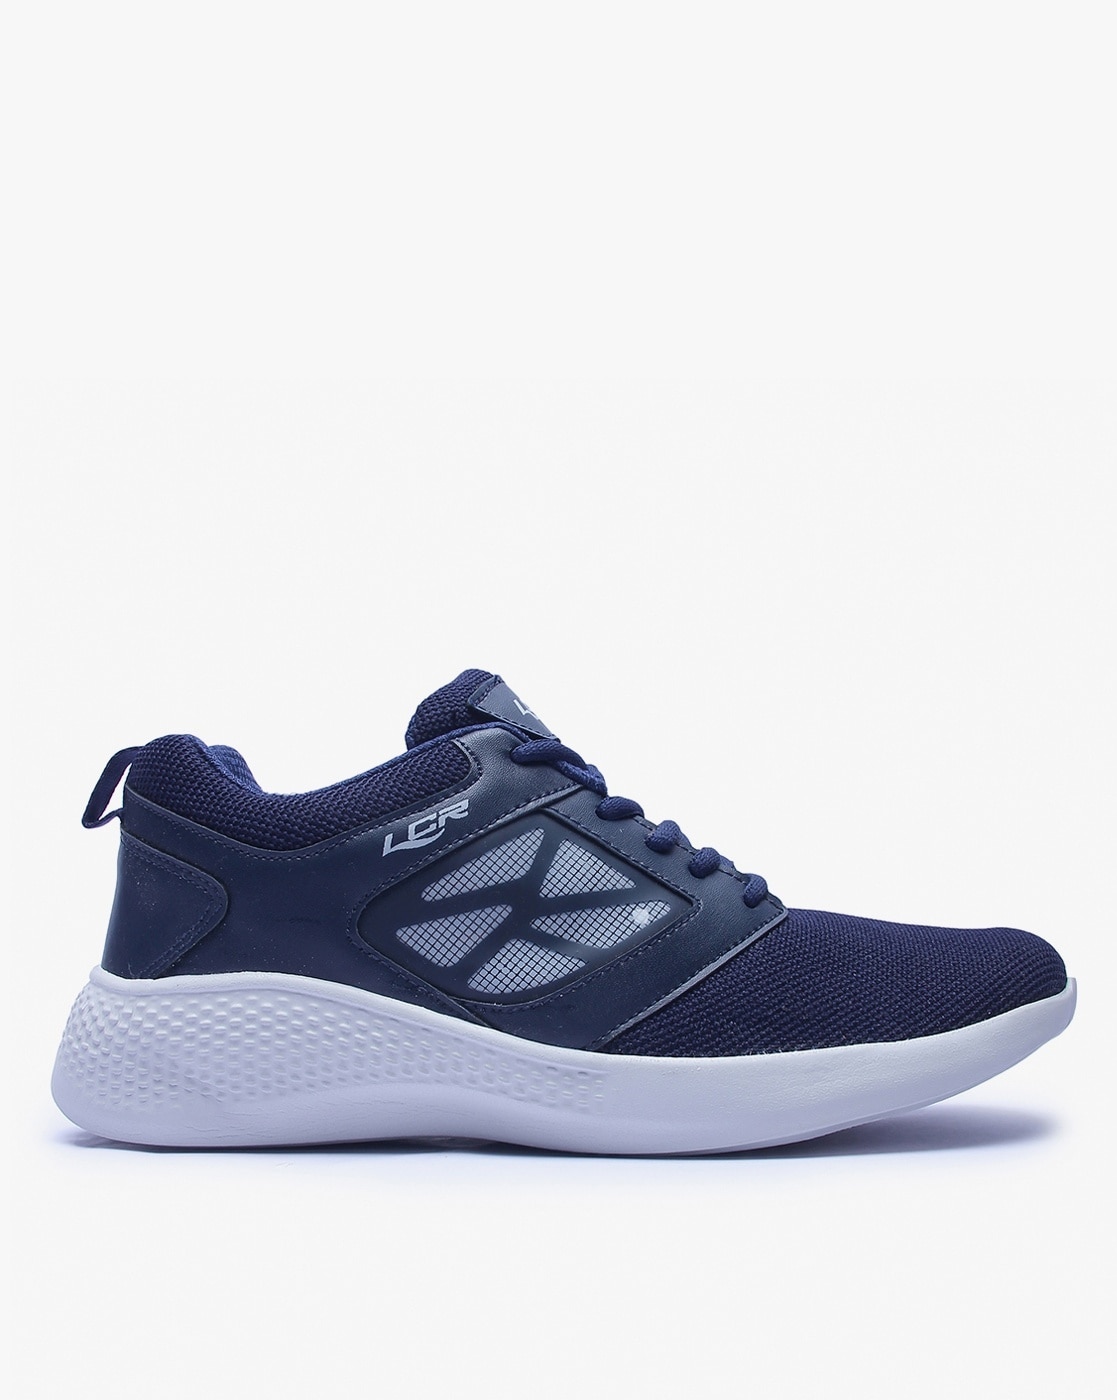 Lancer shoes for men look sporty and are durable | HT Shop Now